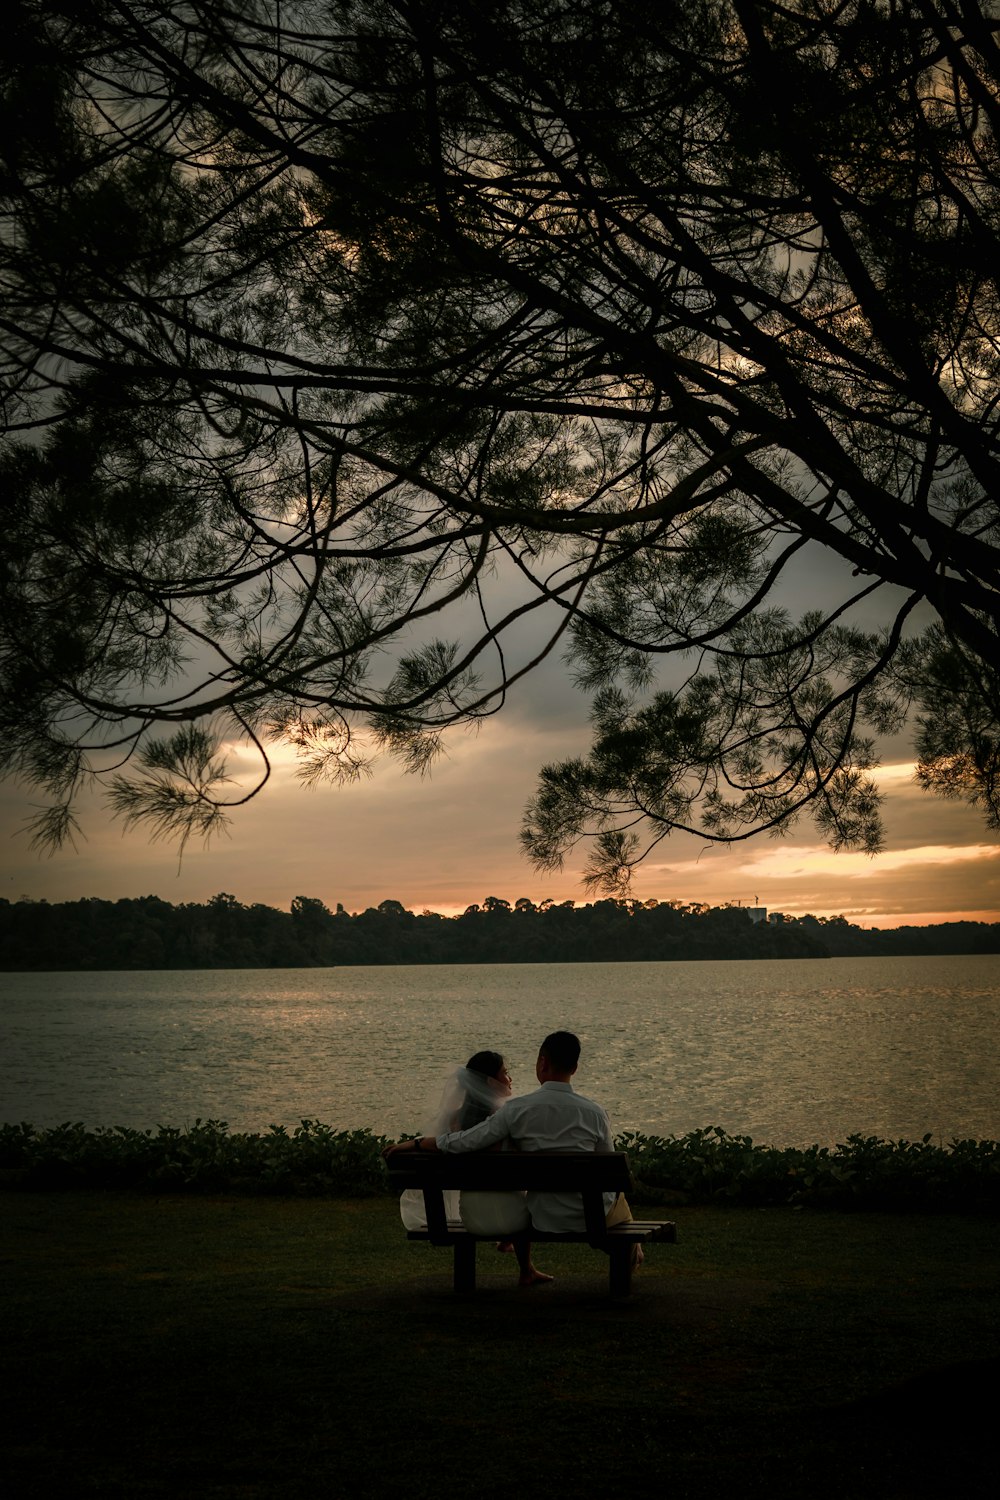 man sitting on bench near body of water during sunset